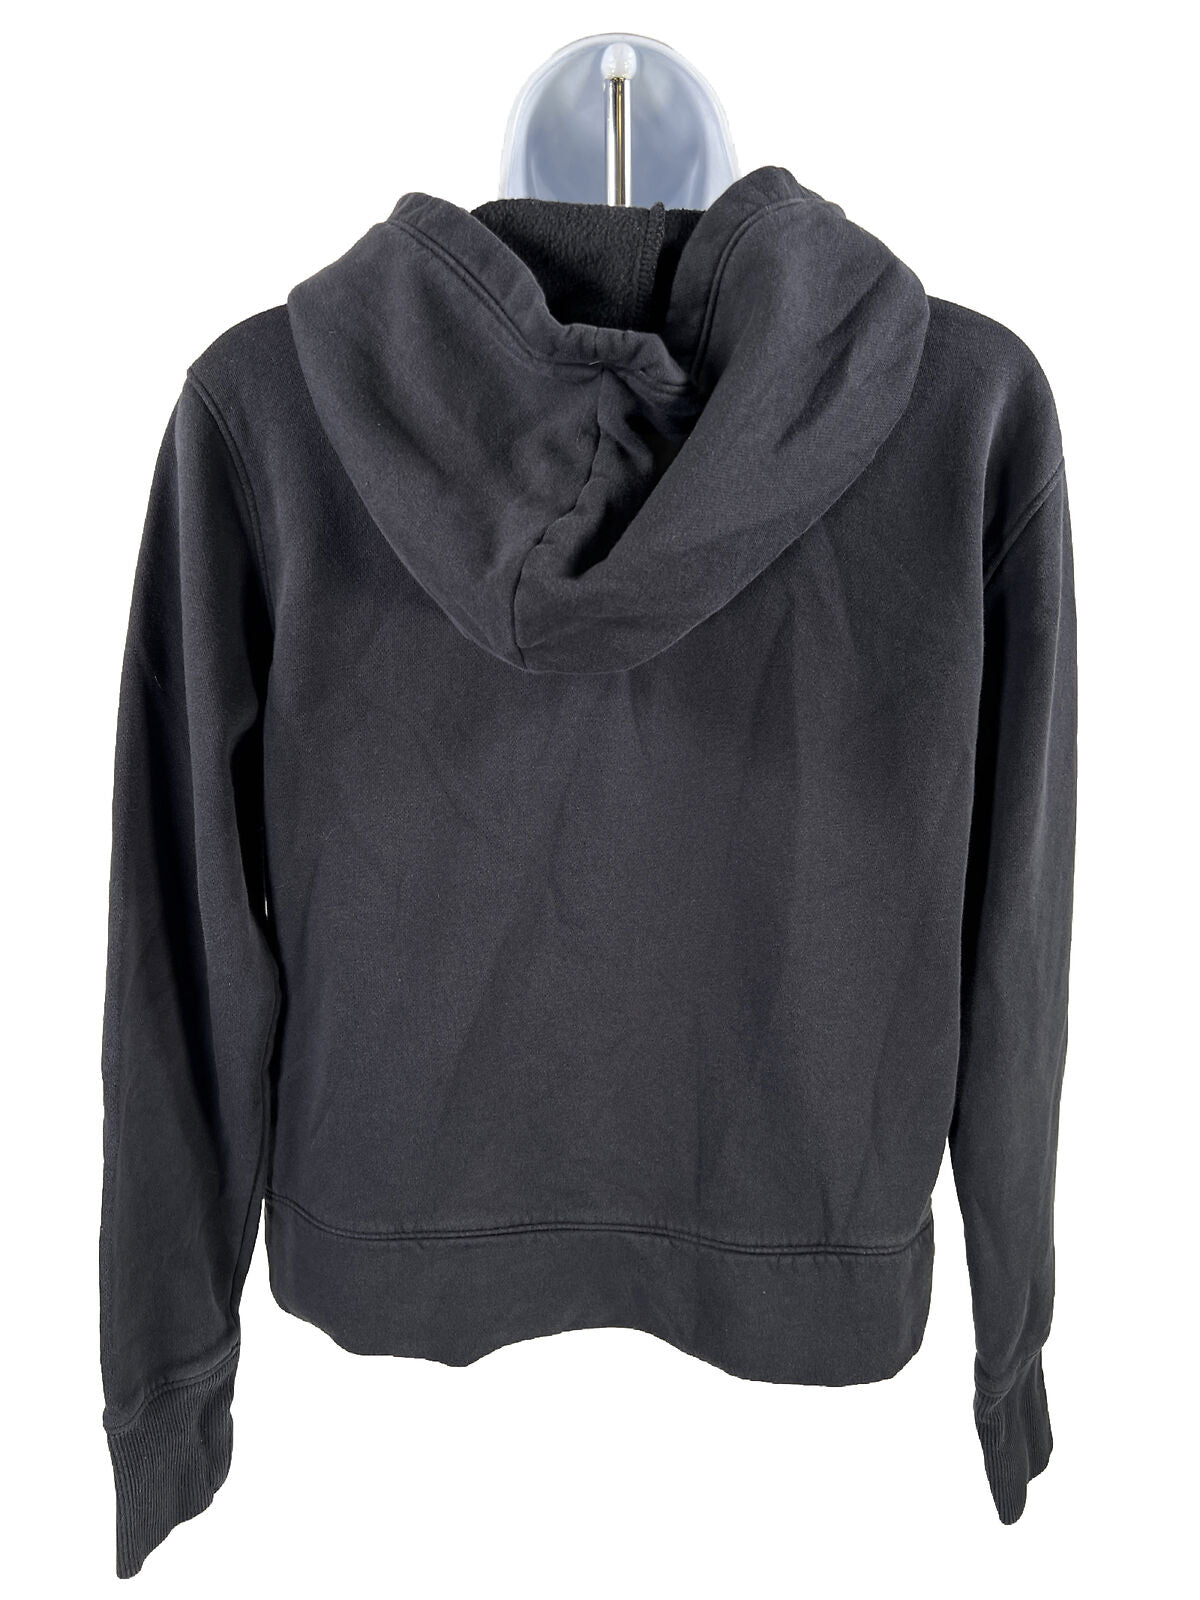 Under Armour Women's Black Cotton Cropped Hoodie - S